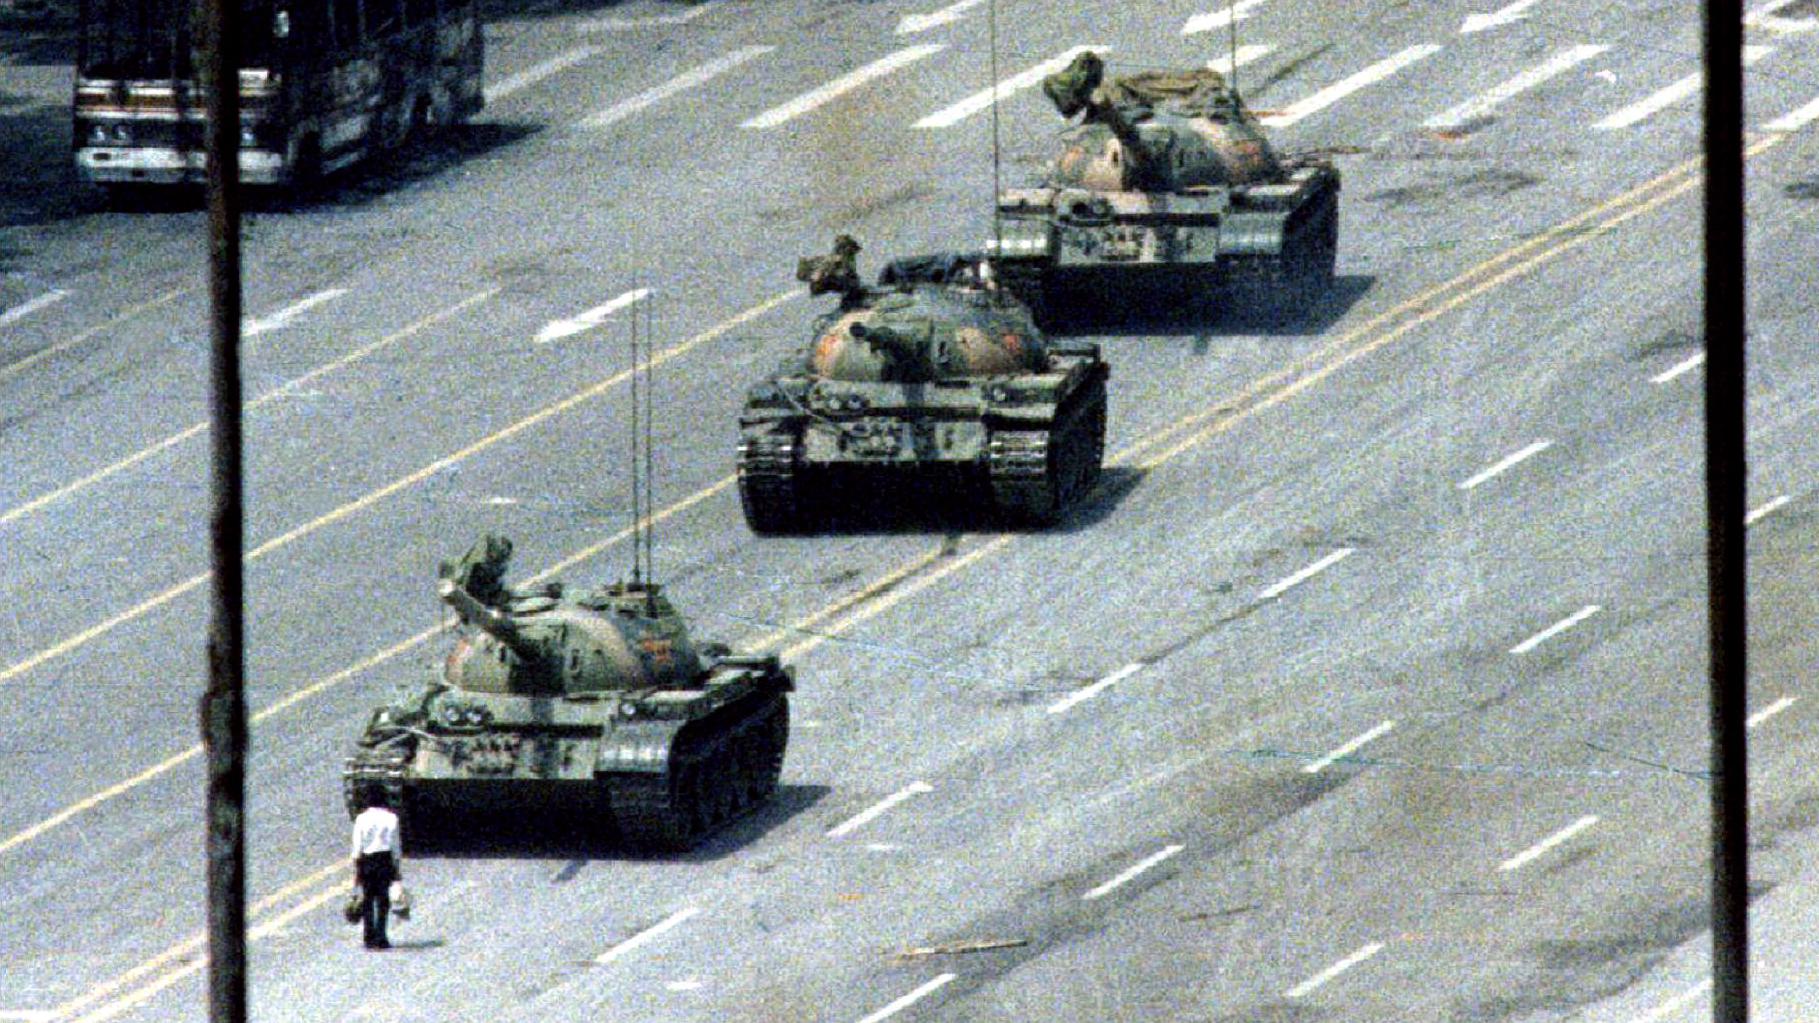 The famous 'tank man', alone and unarmed, stands passively in front of a convoy of tanks on the Avenue of Eternal Peace in Tiananmen Square on June 5, 1989. The iconic image is banned in China but has permeated popular and protest culture around the globe